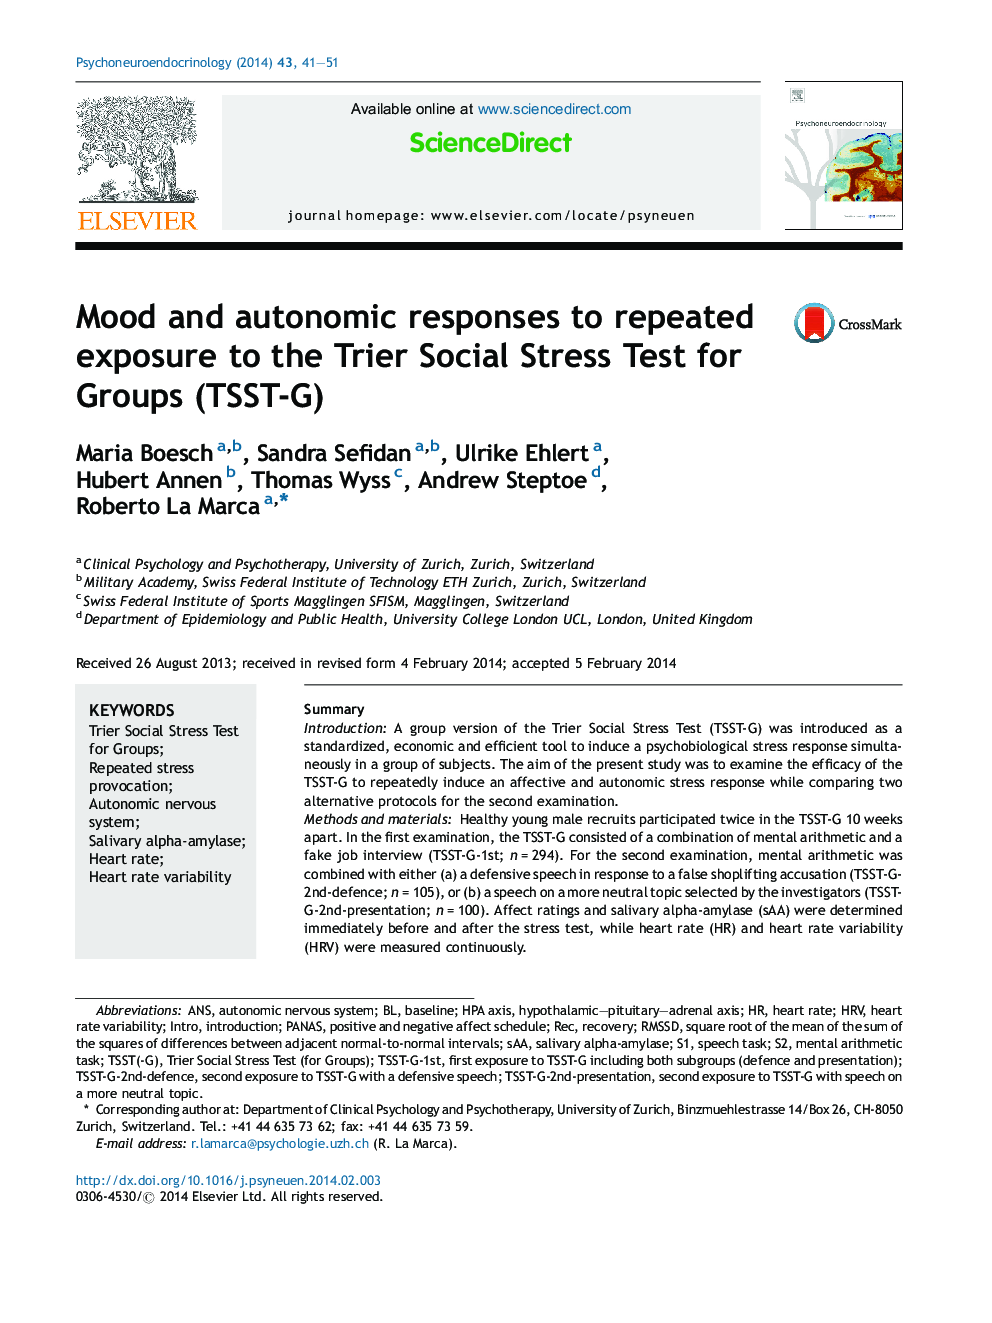 Mood and autonomic responses to repeated exposure to the Trier Social Stress Test for Groups (TSST-G)